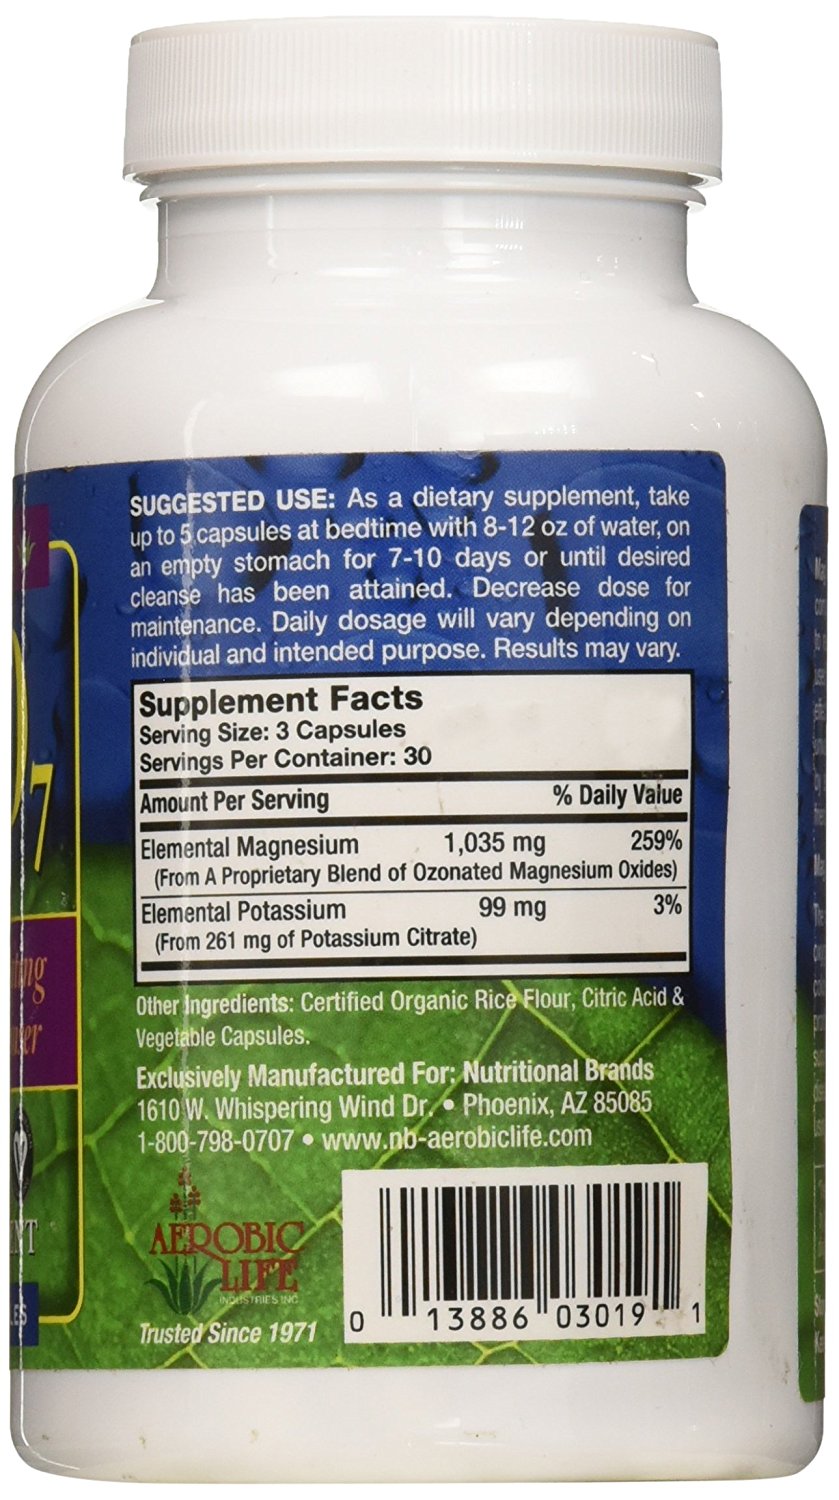 Aerobic Life Mag O7 Oxygen Digestive System Cleanser Capsules